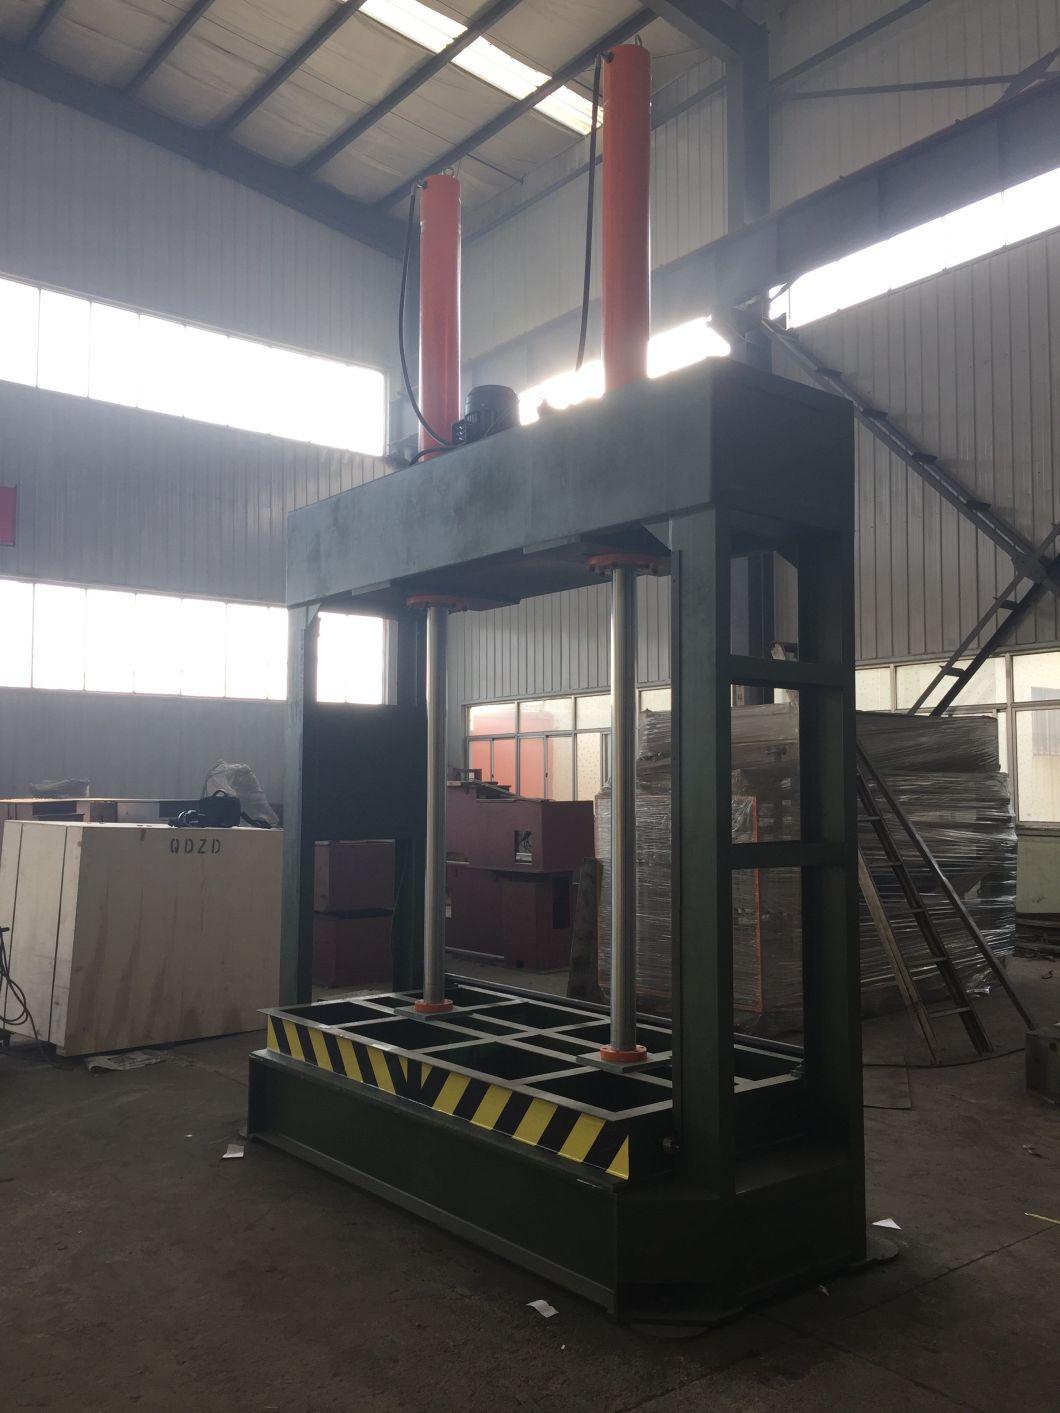 Woodworking Machinery Power Press Hydraulic Cold Press Machine for Door